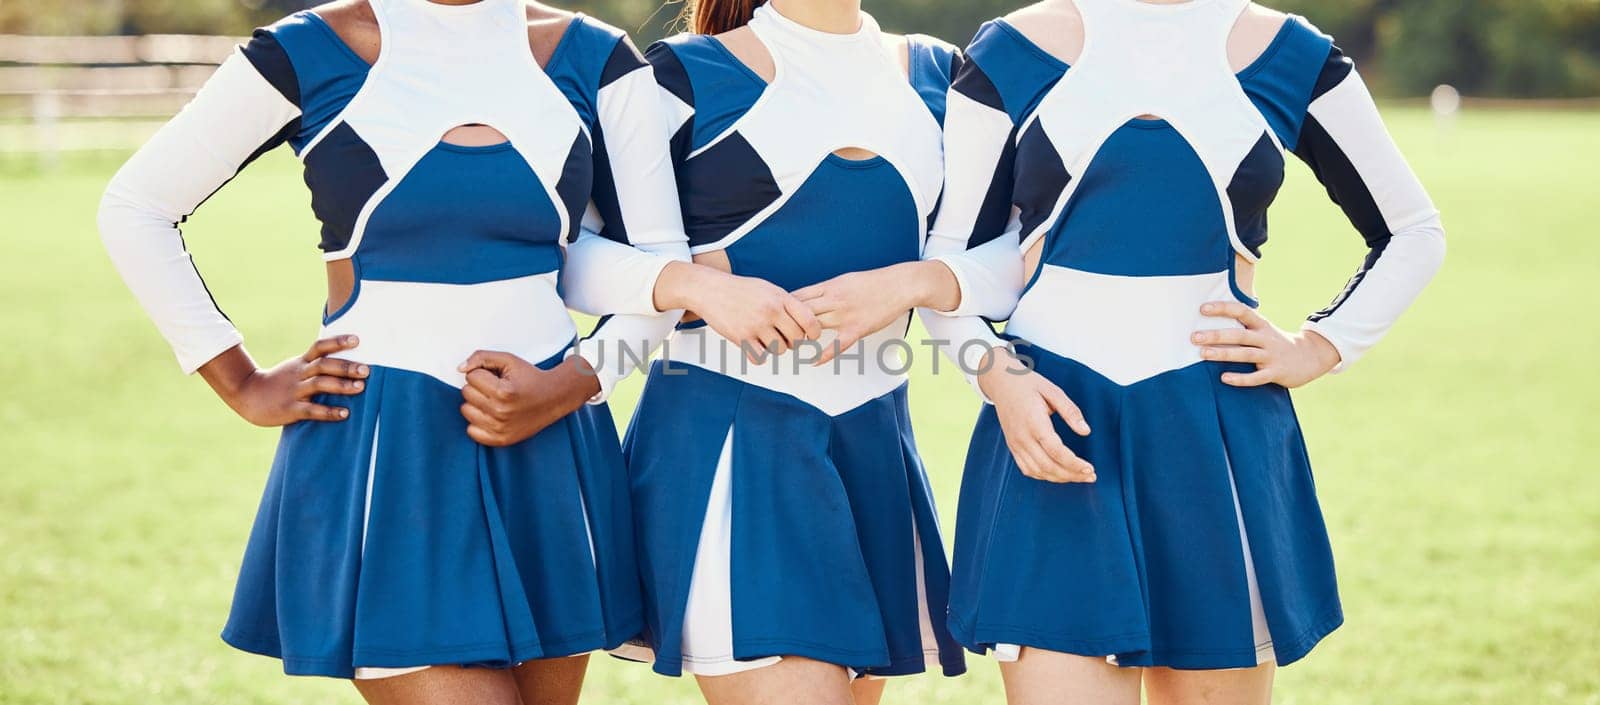 Cheerleader, teen girl team and outdoor, athlete and fitness with squad in uniform and support. Exercise, competition and school event, collaboration and female with sports, teamwork and cheerleading.